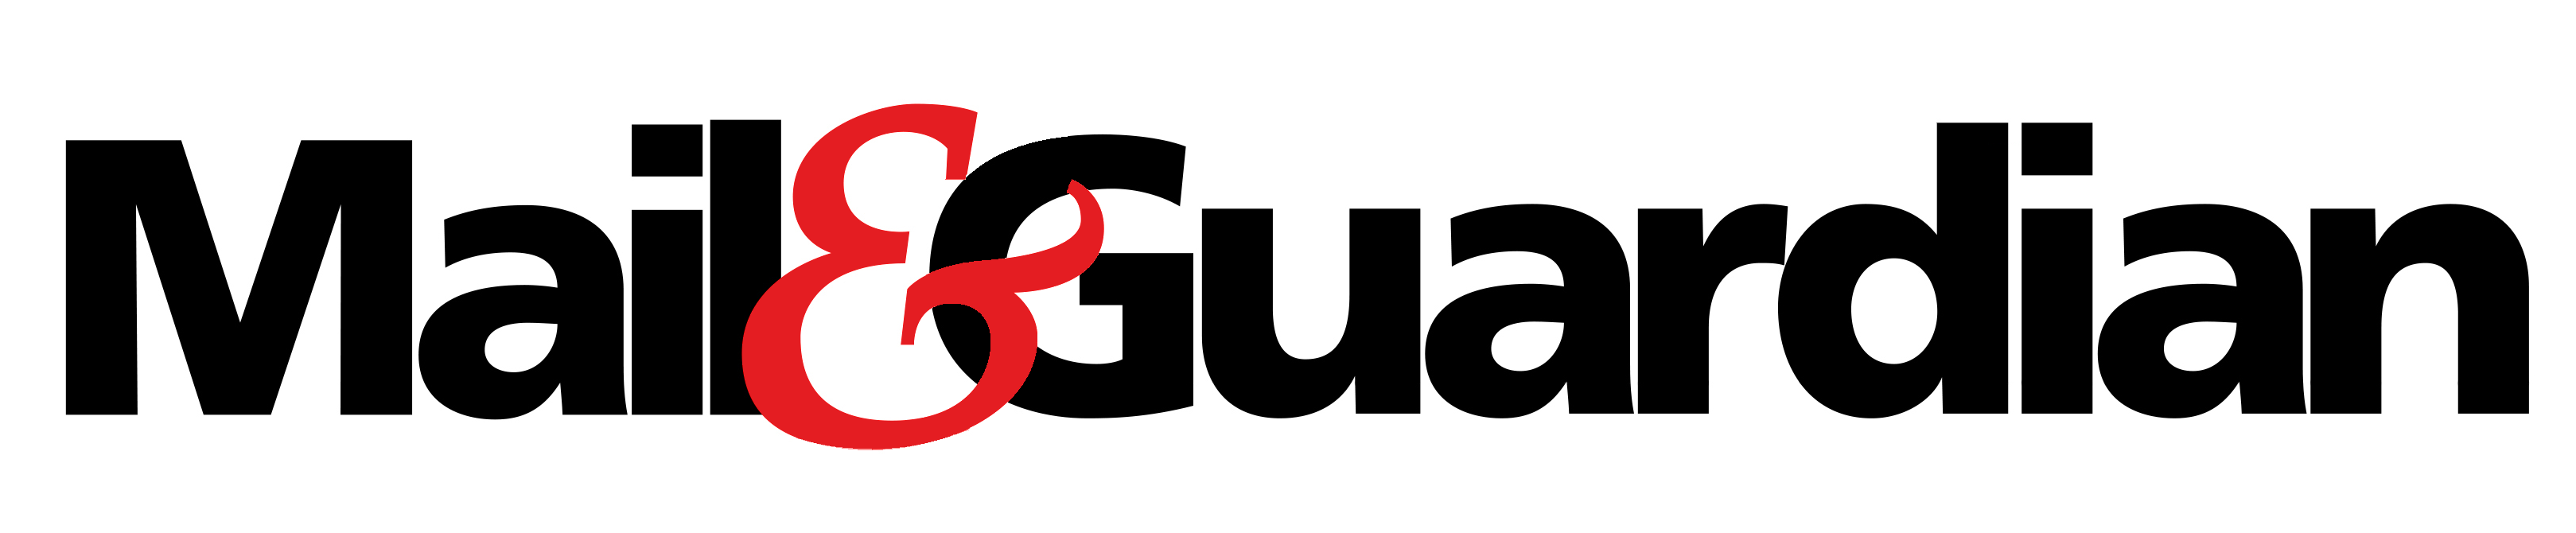 mail and guardian logo